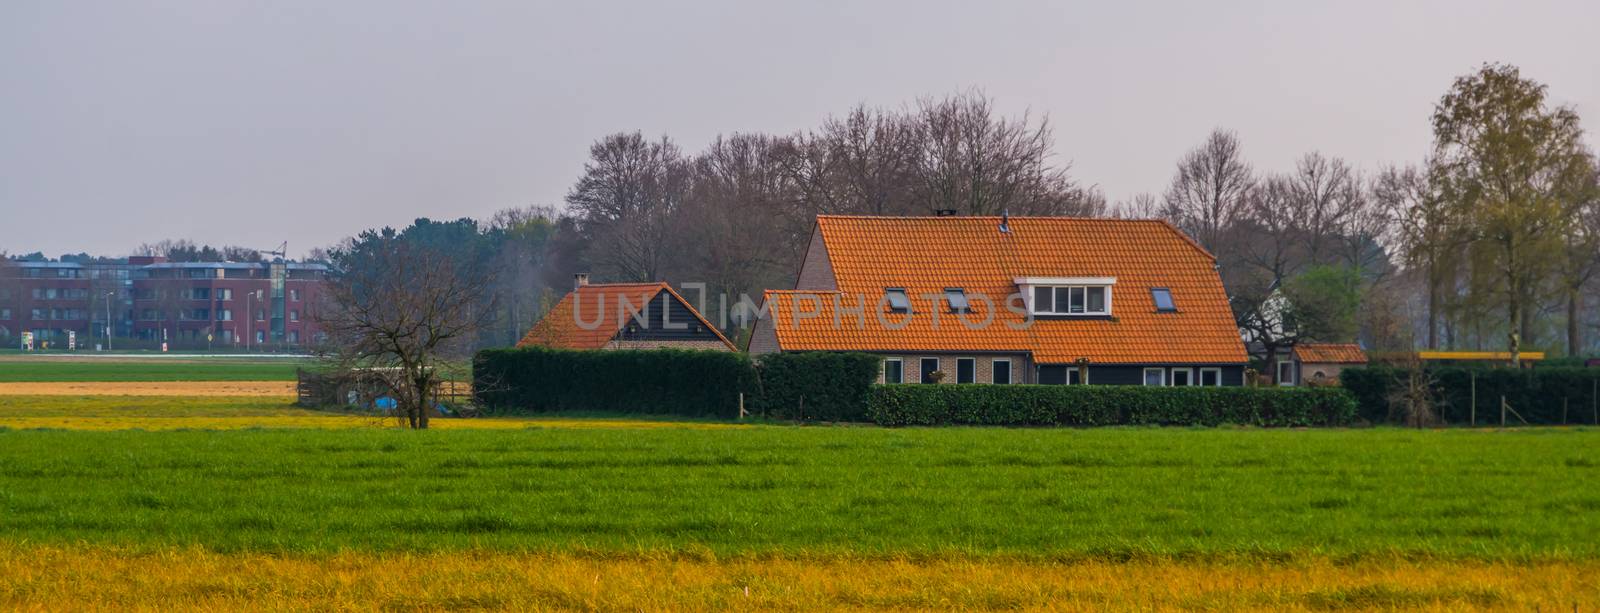 big farmers house at the countryside, typical dutch architecture